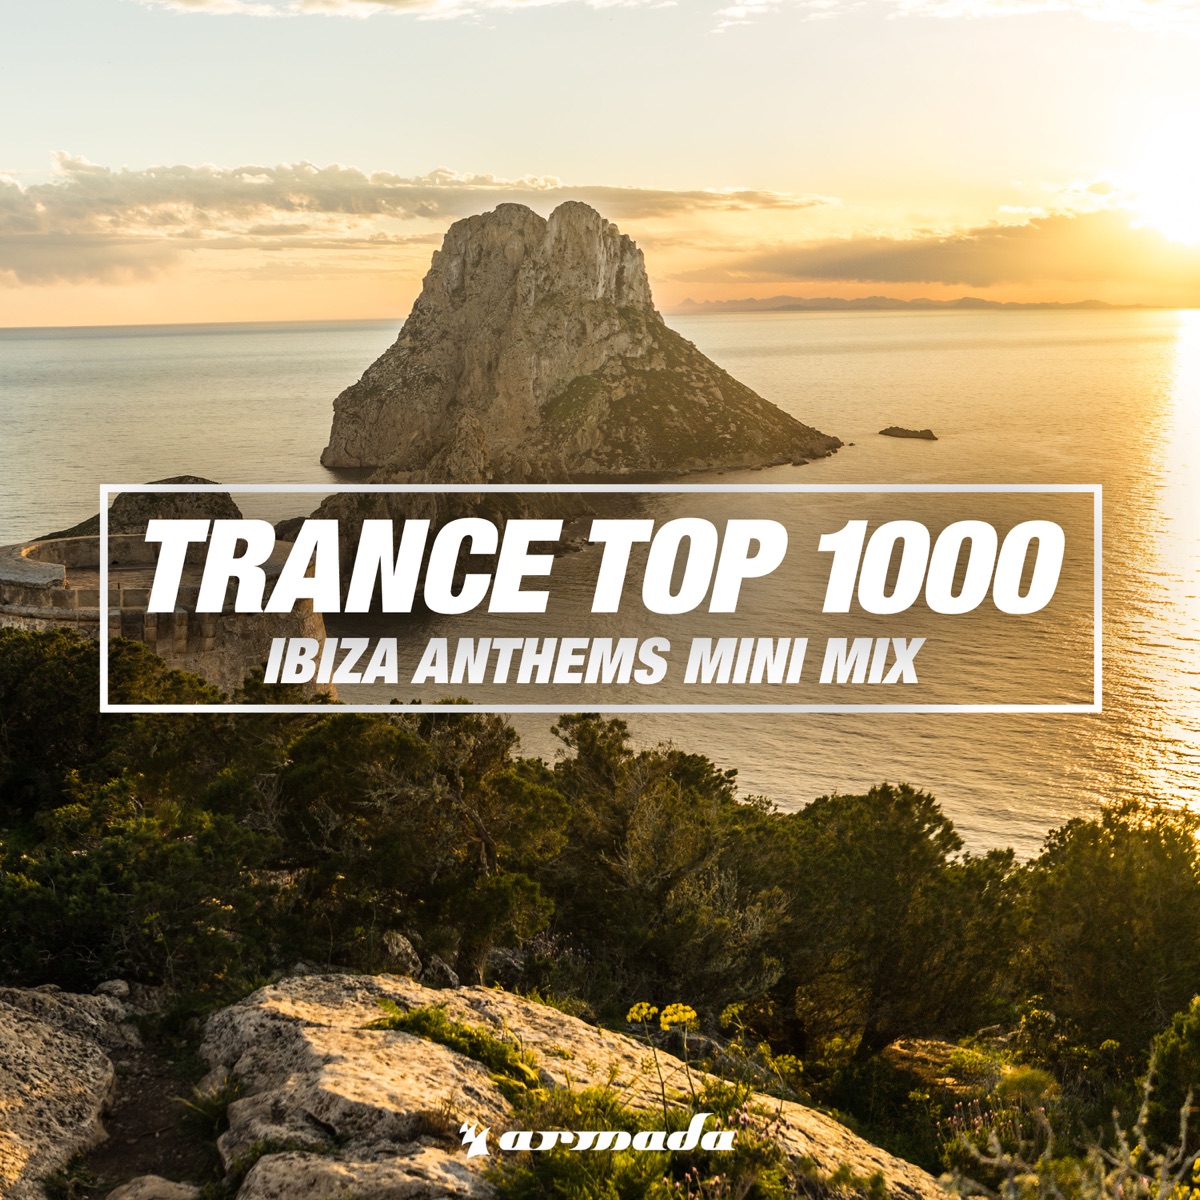 Trance Top 1000 (Ibiza Anthems Mini Mix) - Album by Various Artists - Apple  Music